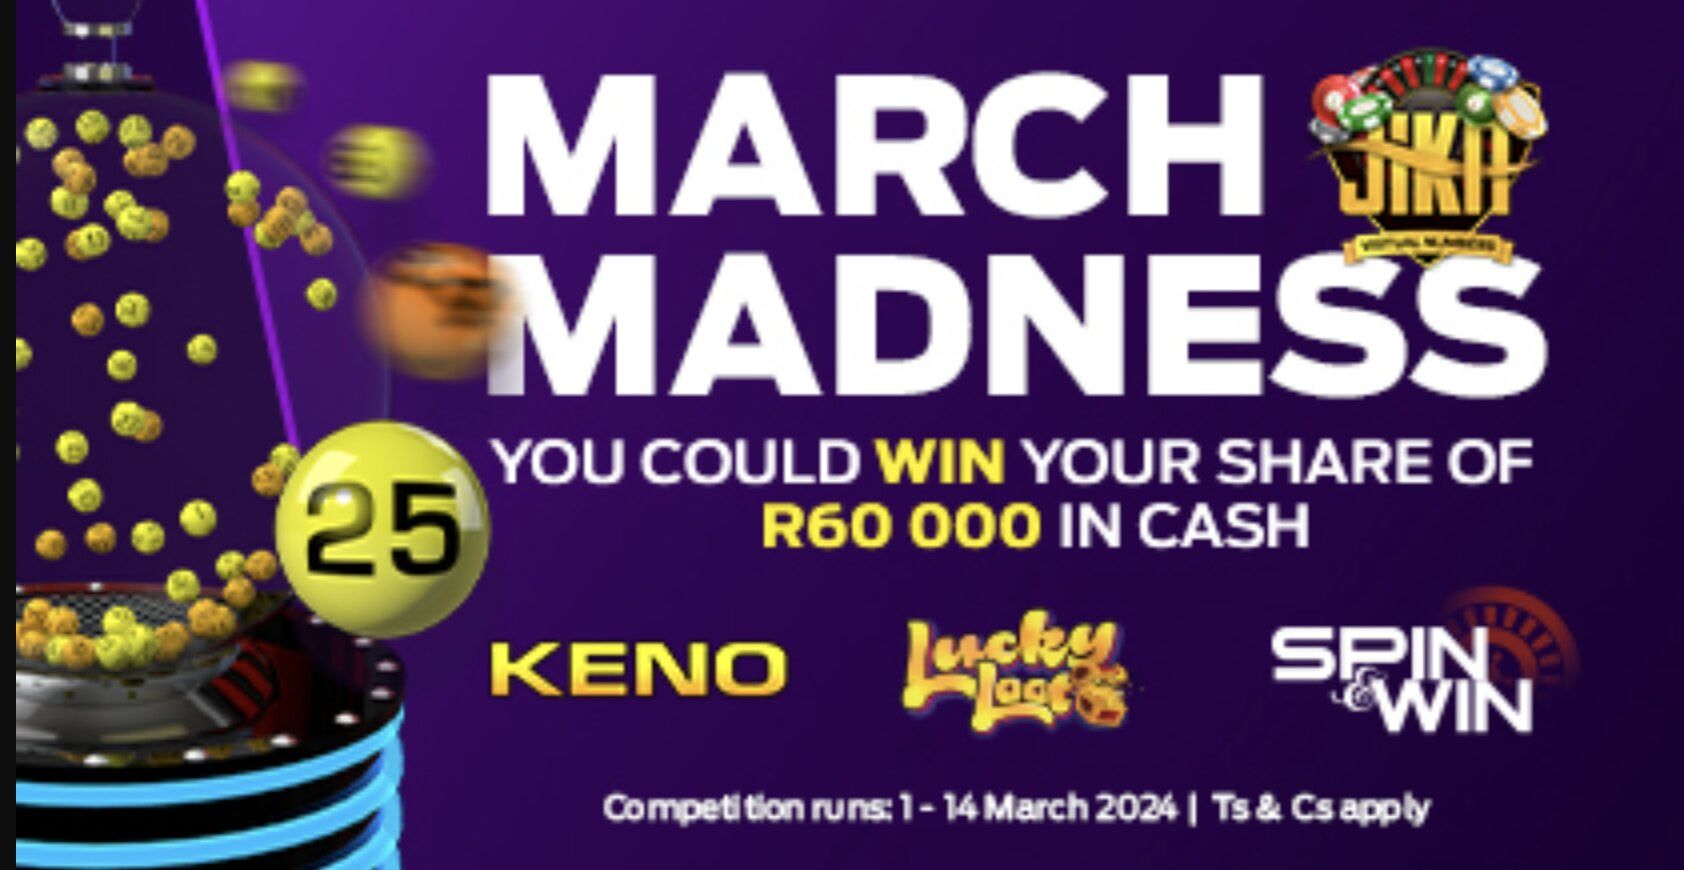 Hollywoodbets March Madness Promotion up to R60,000